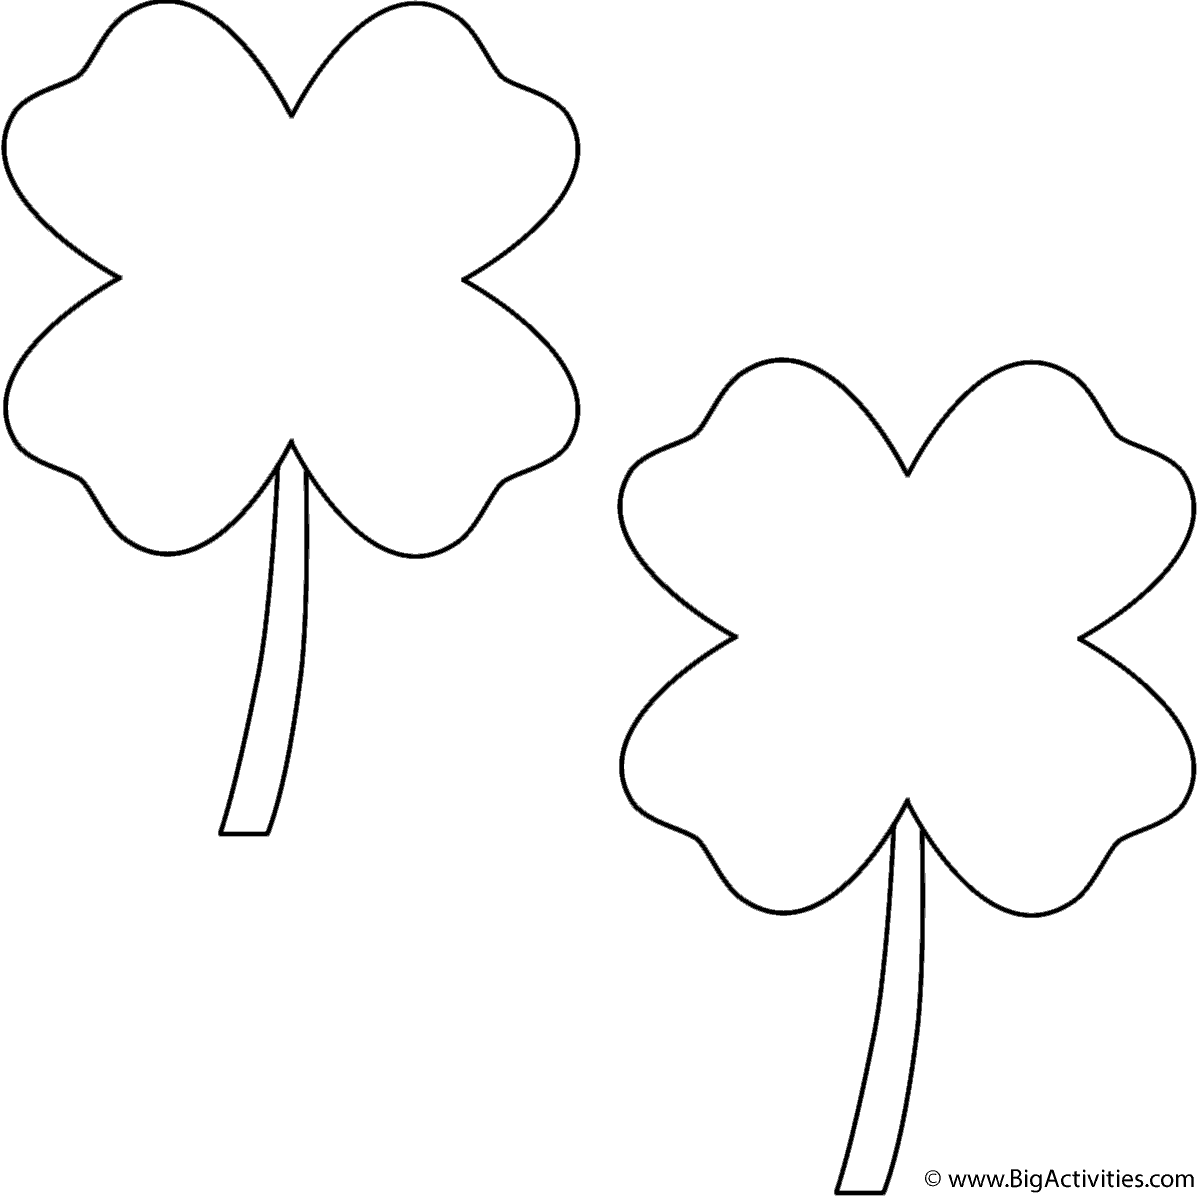 4 H Cloverbud Coloring Pages Coloring Pages